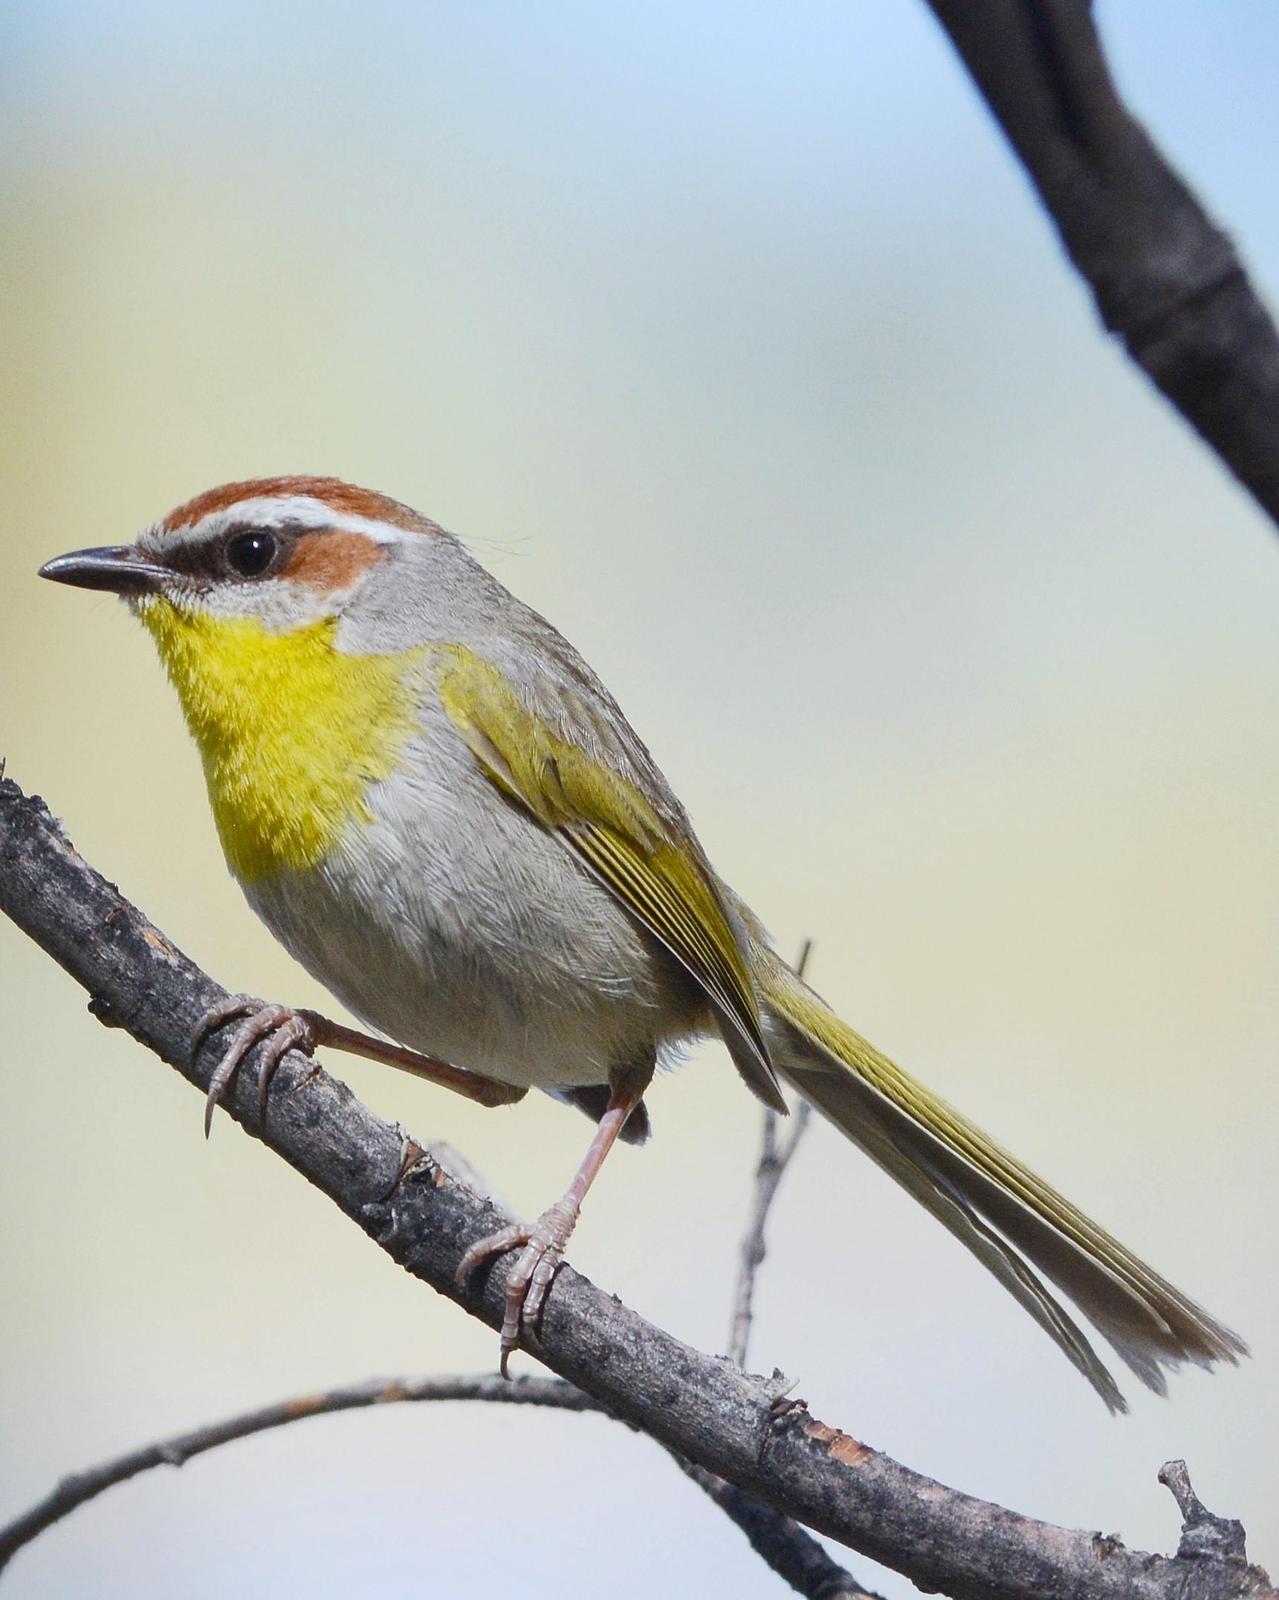 Rufous-capped Warbler Photo by David Hollie